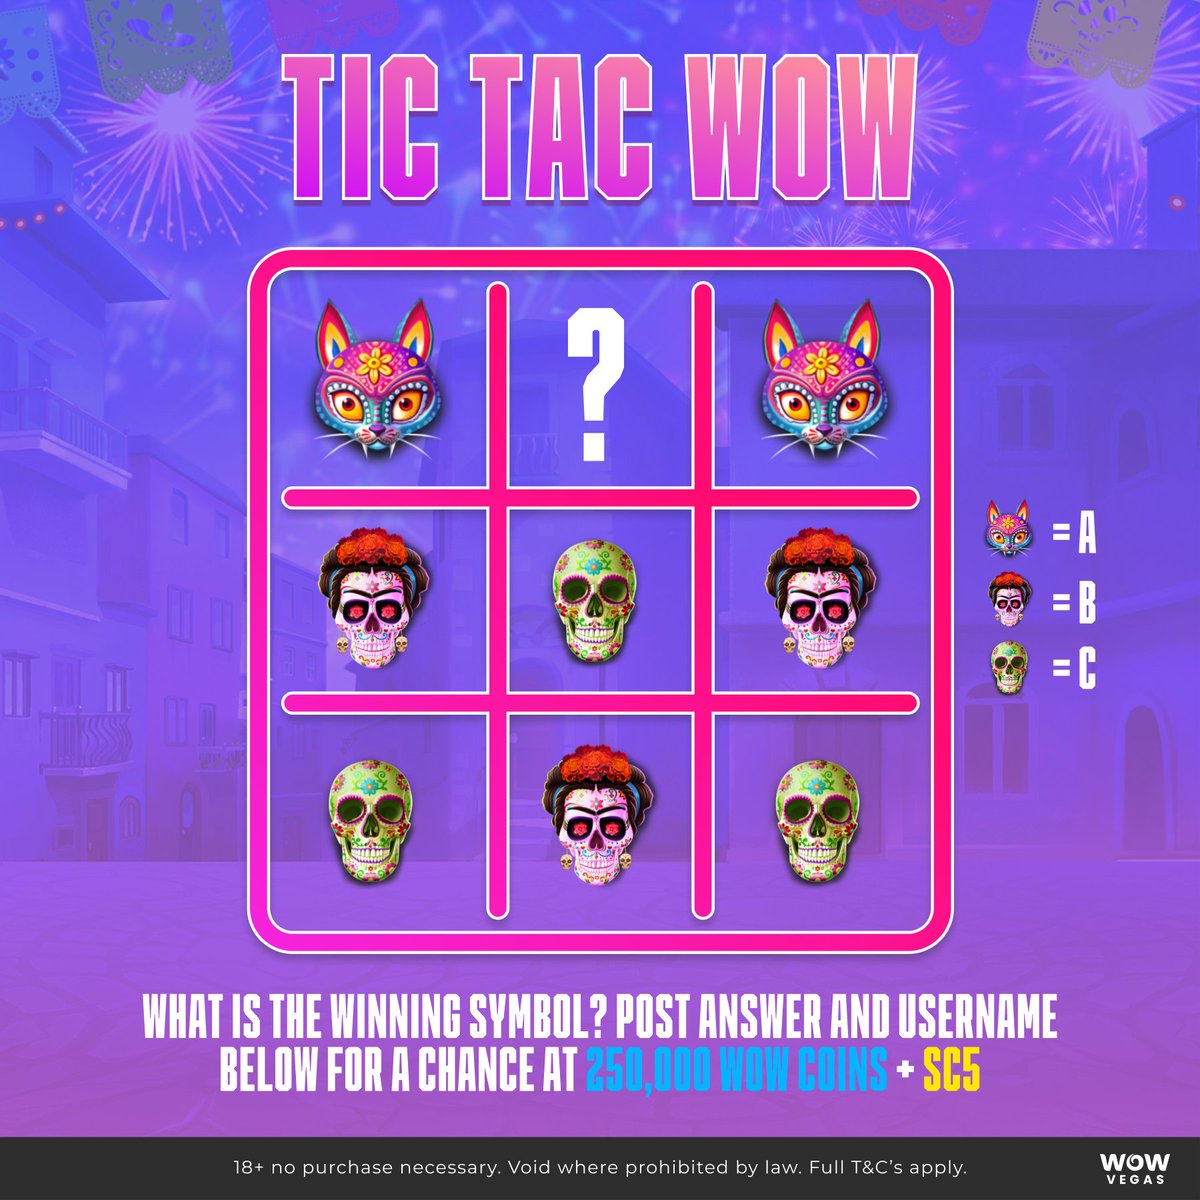 ❌TIC TAC WOW is here!⭕ Let us know what symbol completes our Tic Tac Toe game for a chance at 1 Million WOW Coins and SC20! 🤔 Pop your answer on the comments below and don't forget to add your username. 20 correct answers will be selected for the prize! 💰💰